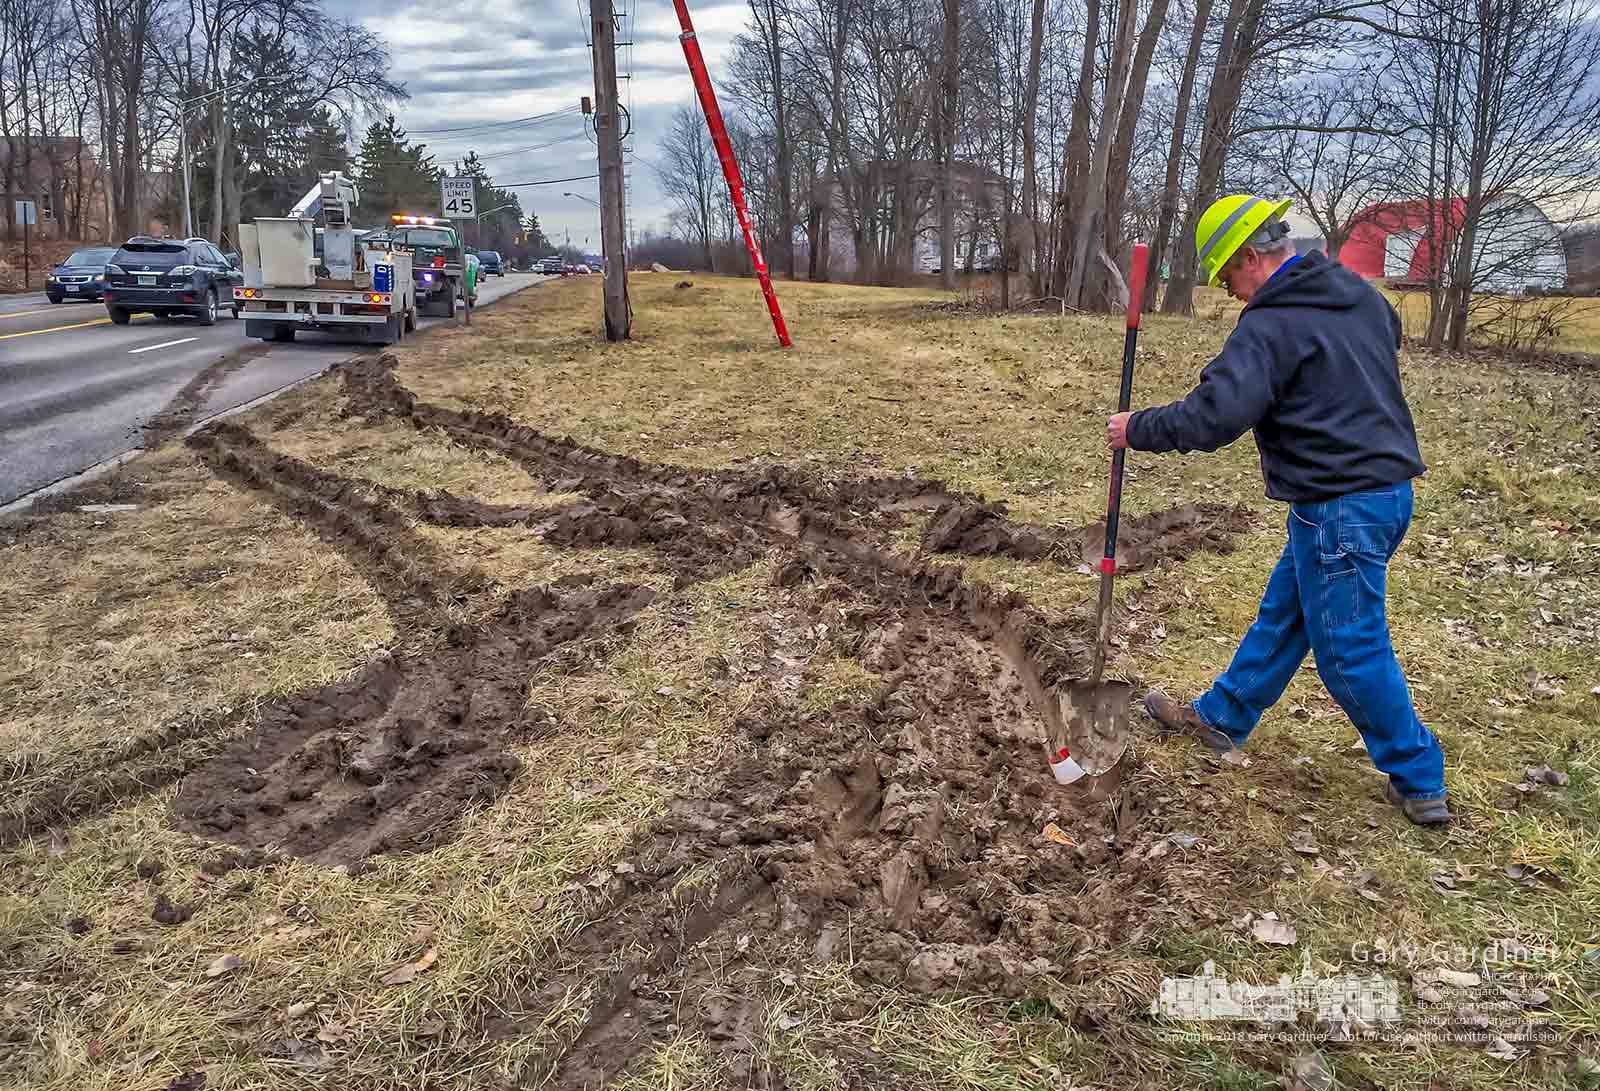 A contractor fills in ruts in the mud left behind when his bucket truck was retrieved after becoming stuck in the mud just off the roadway where a crew inspected overhead fiber optic cables as part of the reconstruction of Cleveland Ave near Schrock Road. My Final Photo for Jan. 22, 2018.